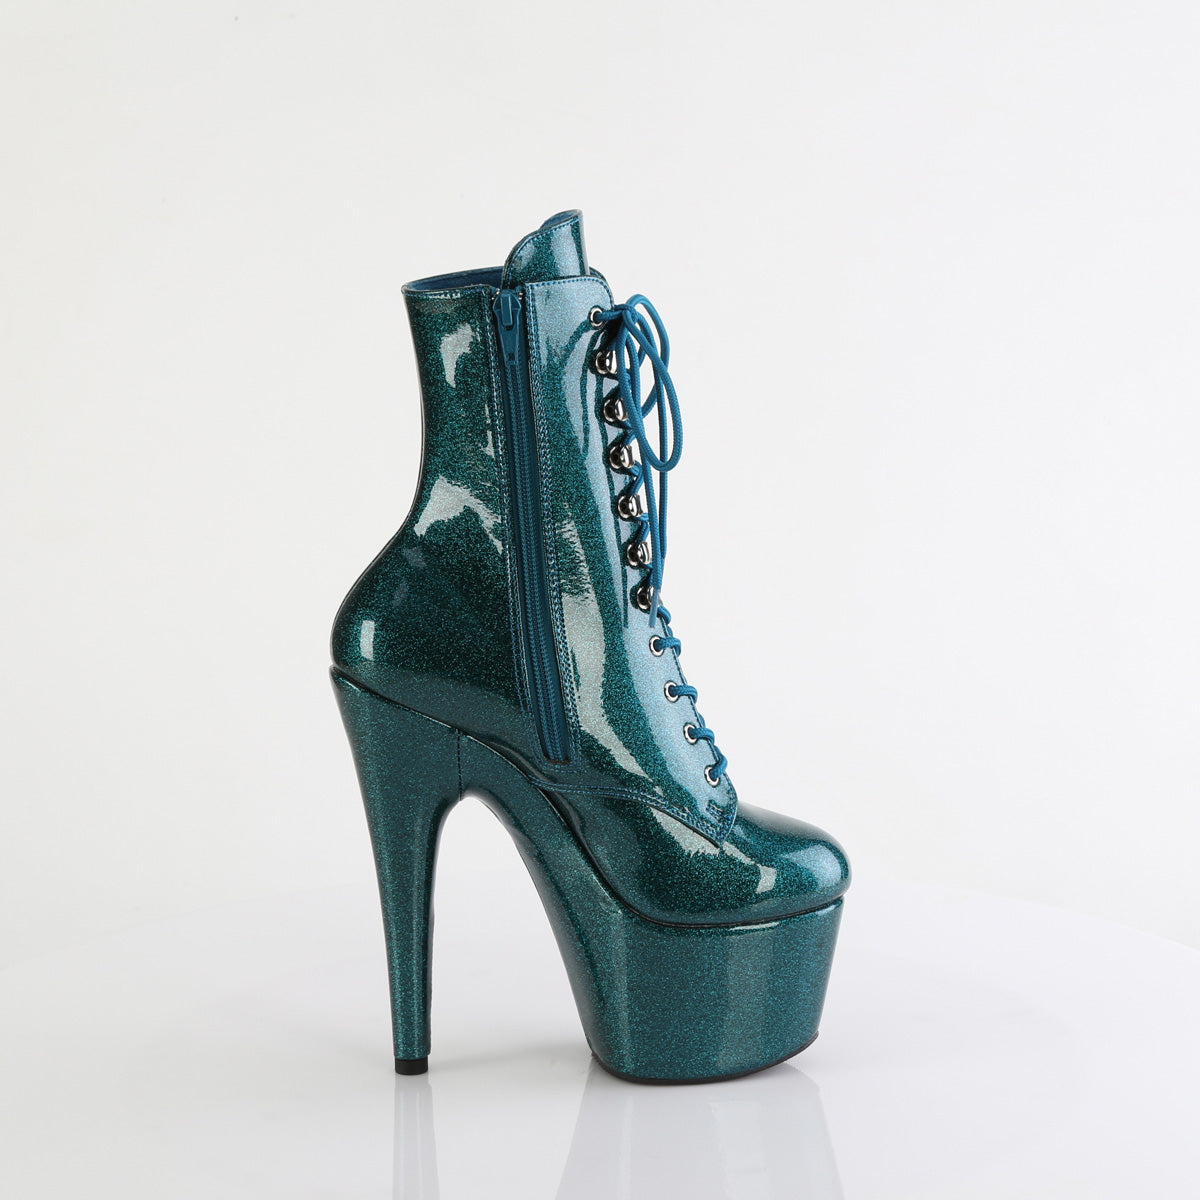 ADORE-1020GP Pleaser Teal Glitter Patent Platform Shoes [Exotic Dance Ankle Boots]